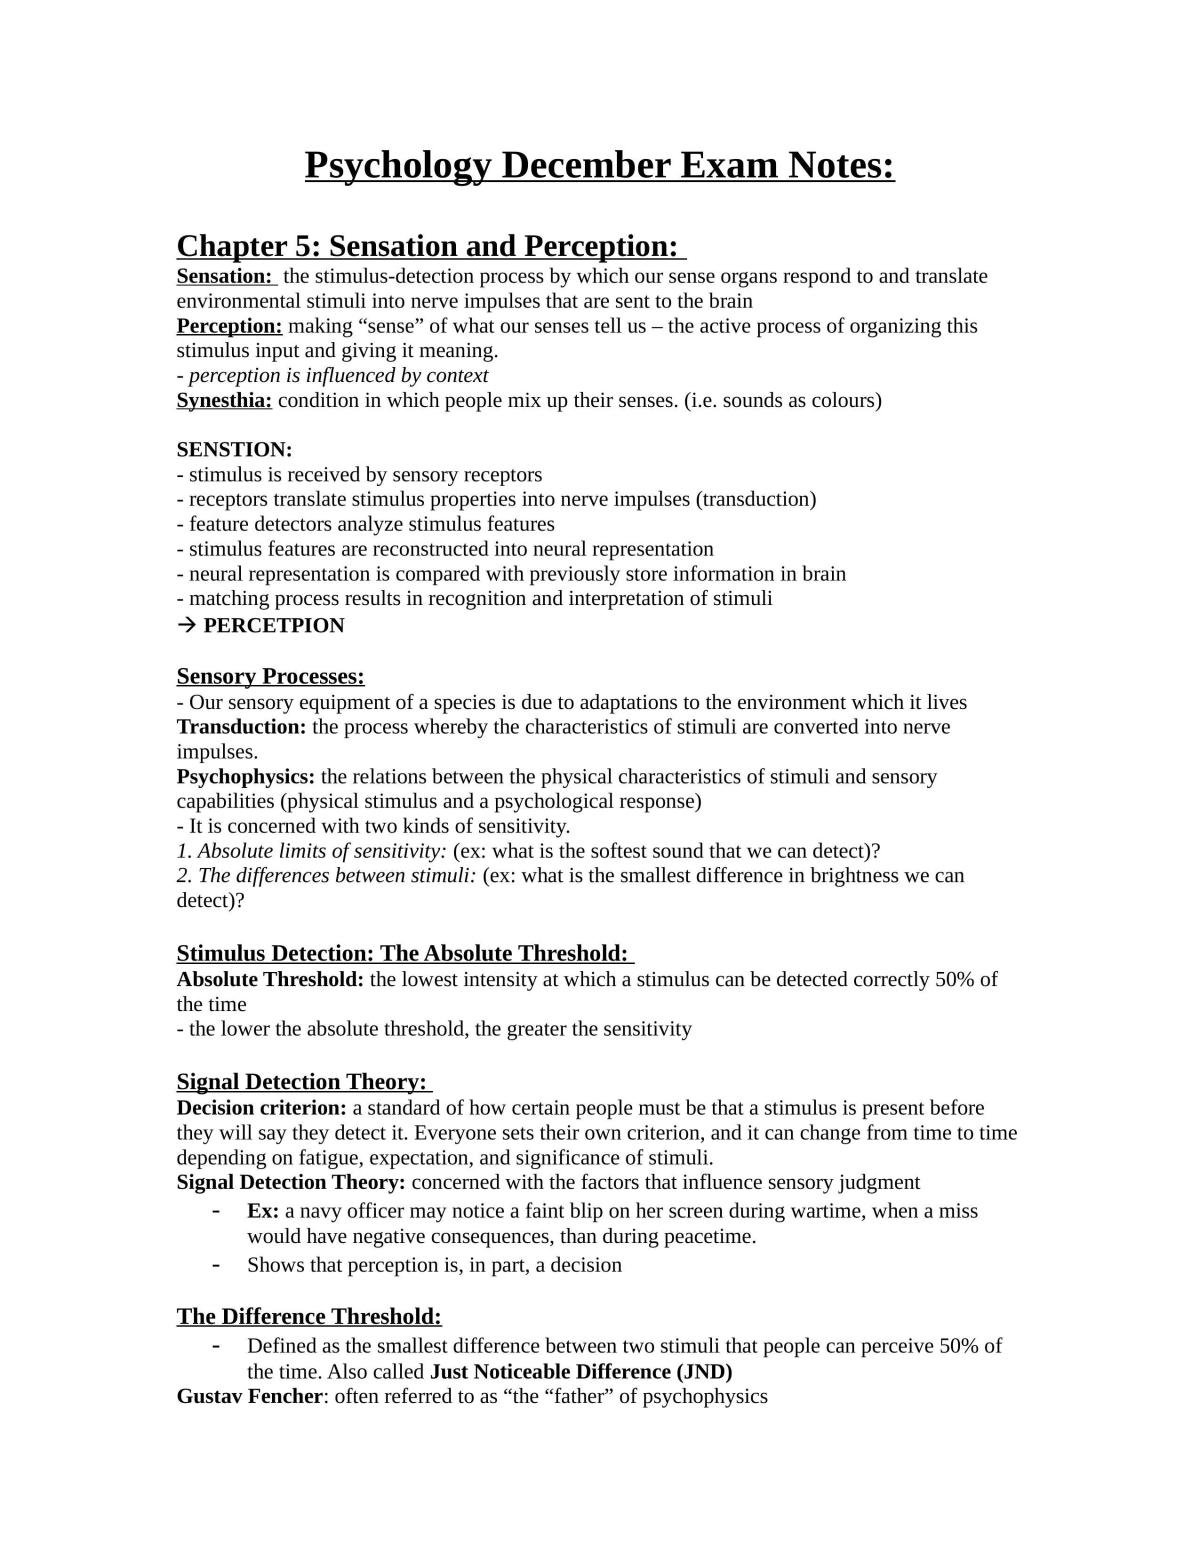 Complete Study Notes - BIOLOGY1001 - Page 1